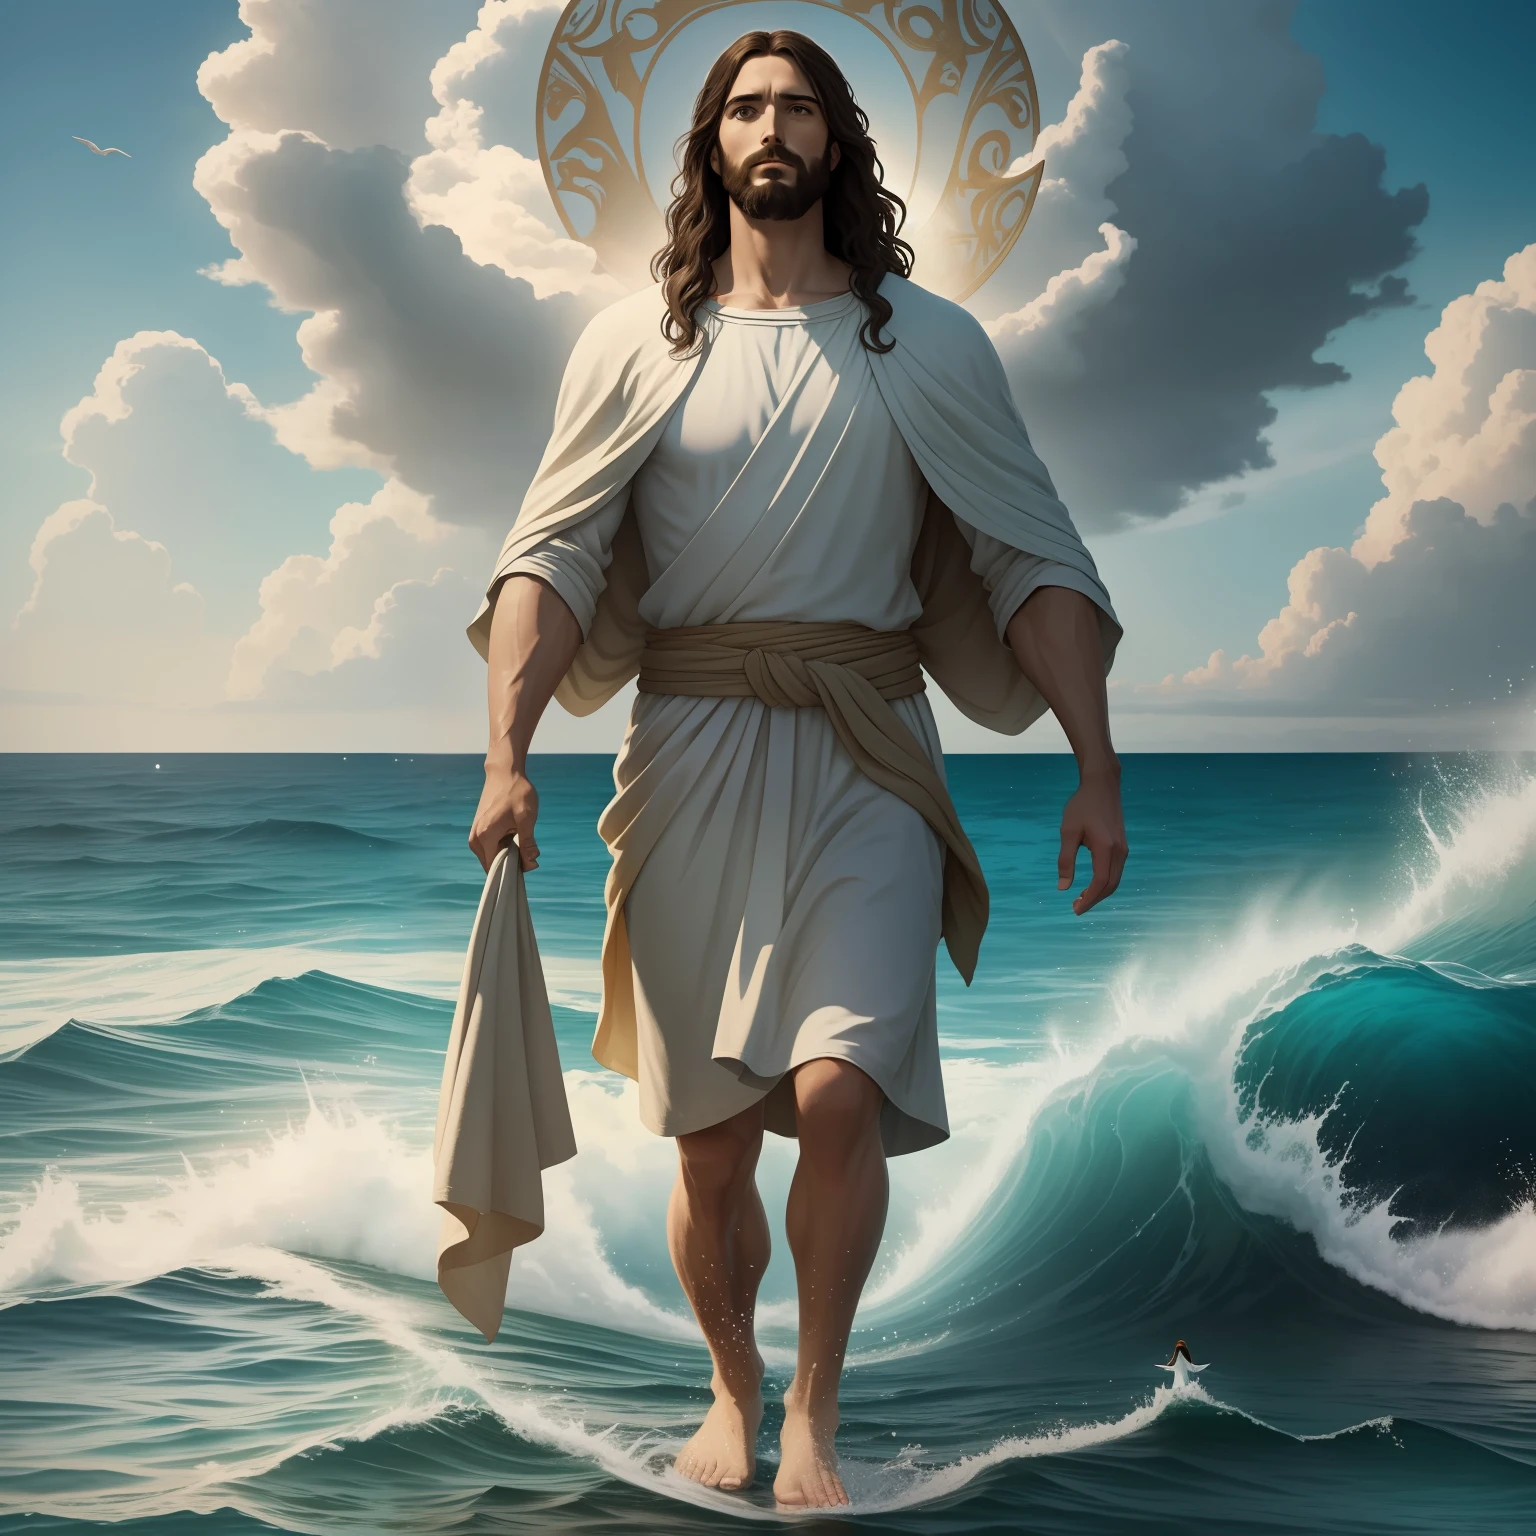 Jesus walking on water with a heaven cloud in the background, Jesus walking on water, biblical illustration, epic biblical representation, forcing him to flee, coming out of the ocean, ! holding in hand!, blessing to help people, disembarking, god of the ocean, beautiful representation, 8k sunny blessings light, realistic,